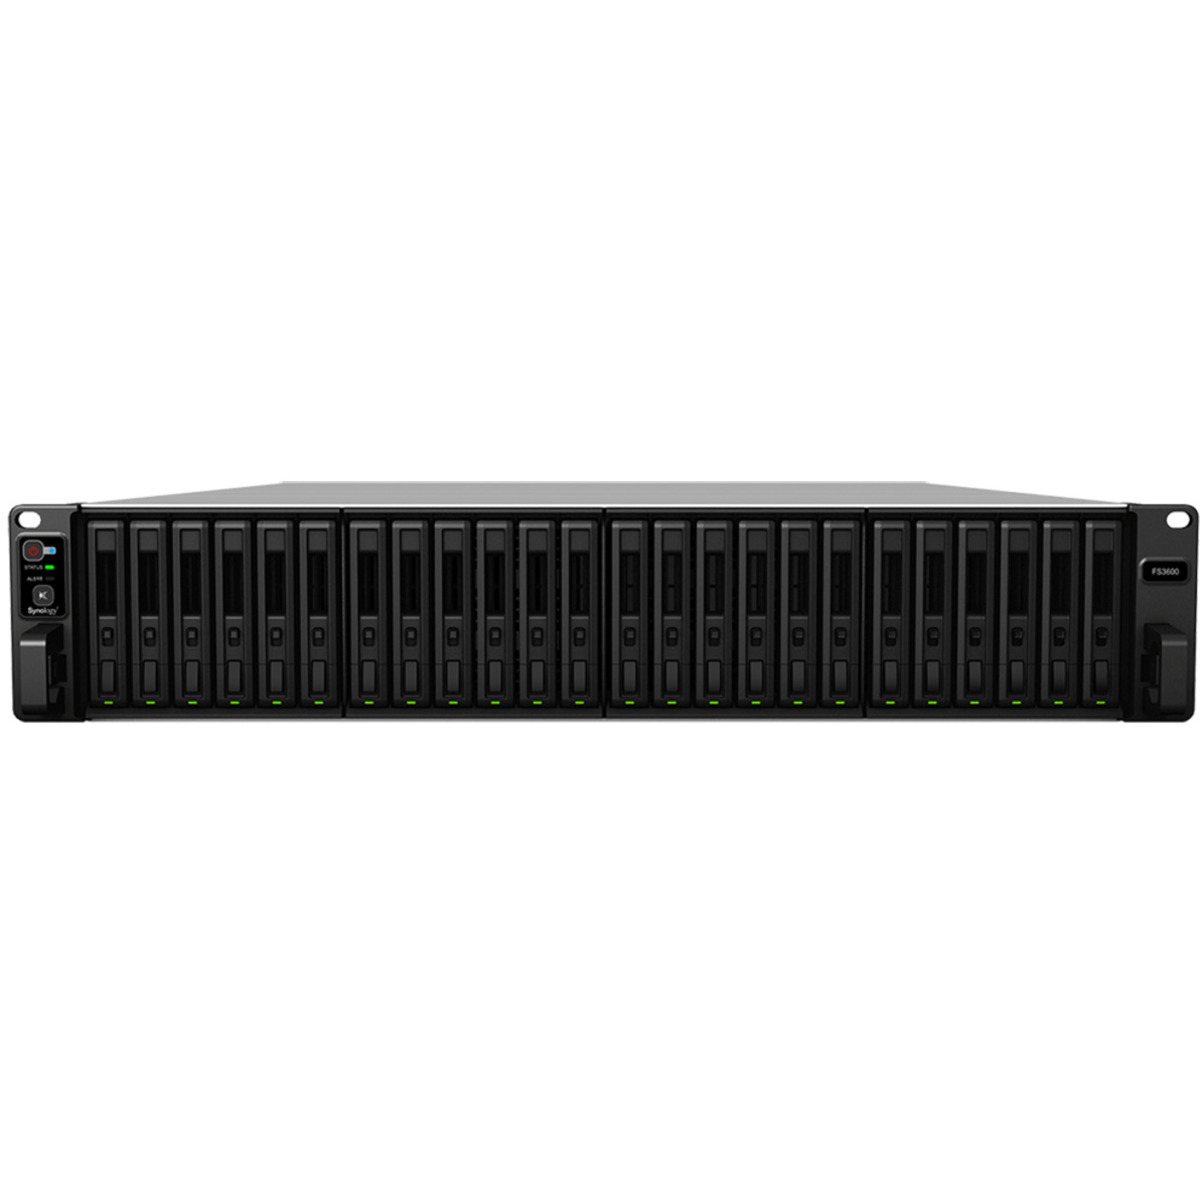 Synology FlashStation FS3600 23tb 24-Bay RackMount Large Business / Enterprise NAS - Network Attached Storage Device 24x960gb Synology SAT5210 Series SAT5210-960G 2.5 530/500MB/s SATA 6Gb/s SSD ENTERPRISE Class Drives Installed - Burn-In Tested - FREE RAM UPGRADE FlashStation FS3600